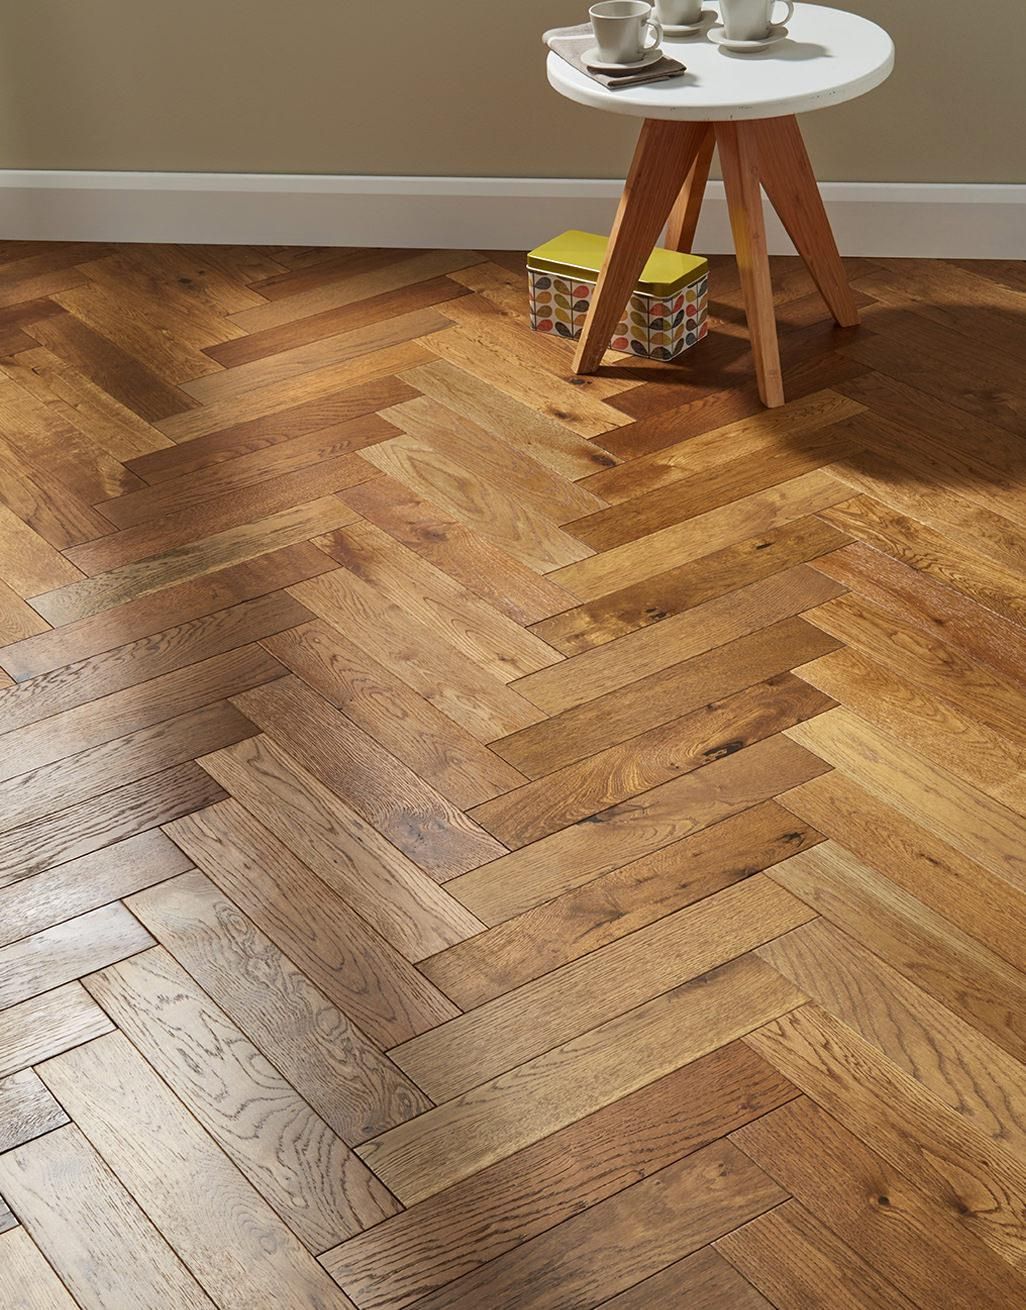 How to make your floor lasting longer using wood floor finishes